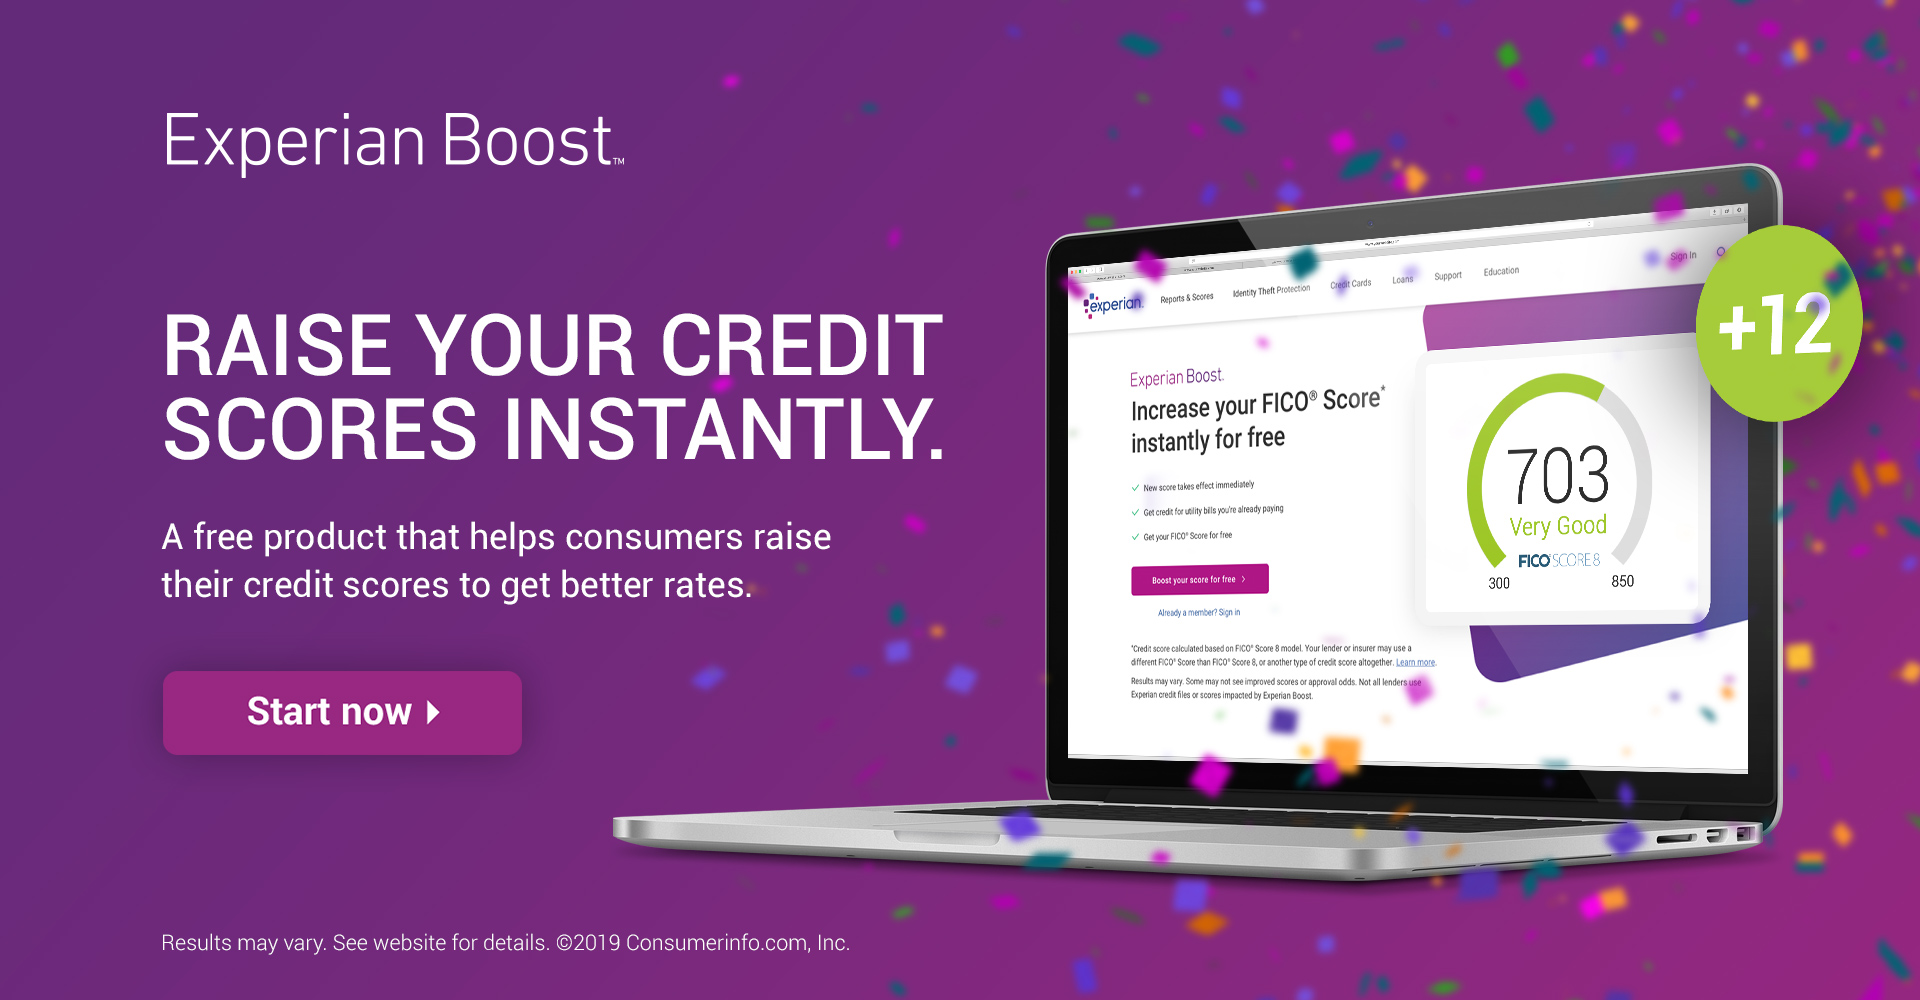 Experian Boost Start Now